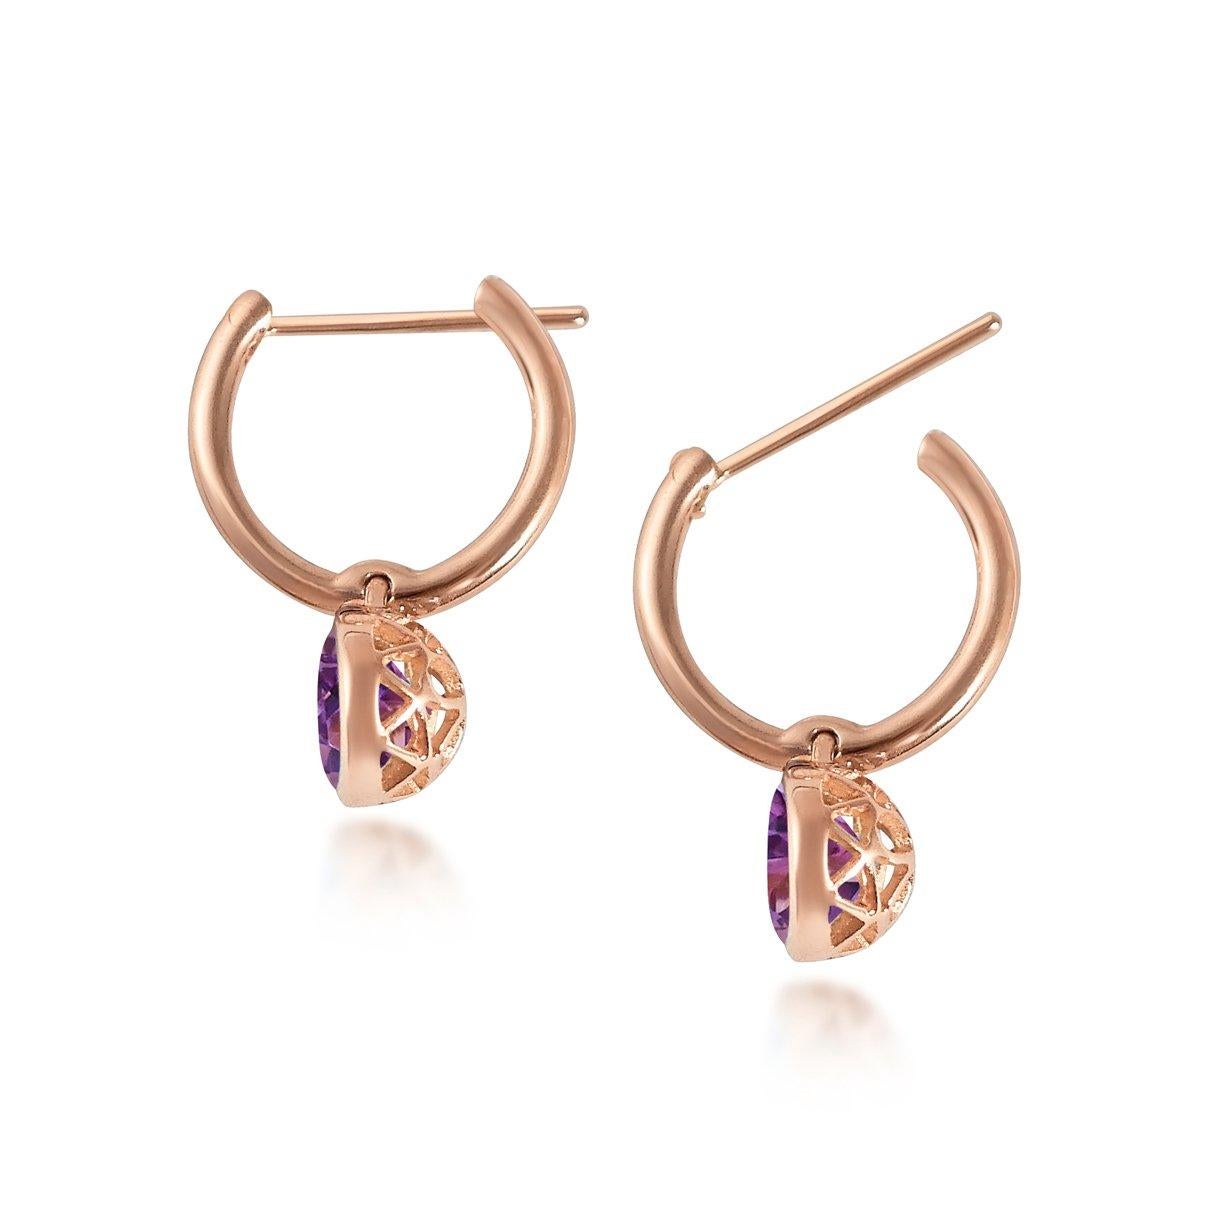 Handcrafted 2.40 Carats Amethyst 18 Karat Rose Gold Drop Earrings. The 8mm natural stones are set in our iconic hand pierced gold lace to let the light through. Our precious and fine stones on our dangling earrings are highlighted by a diamond on